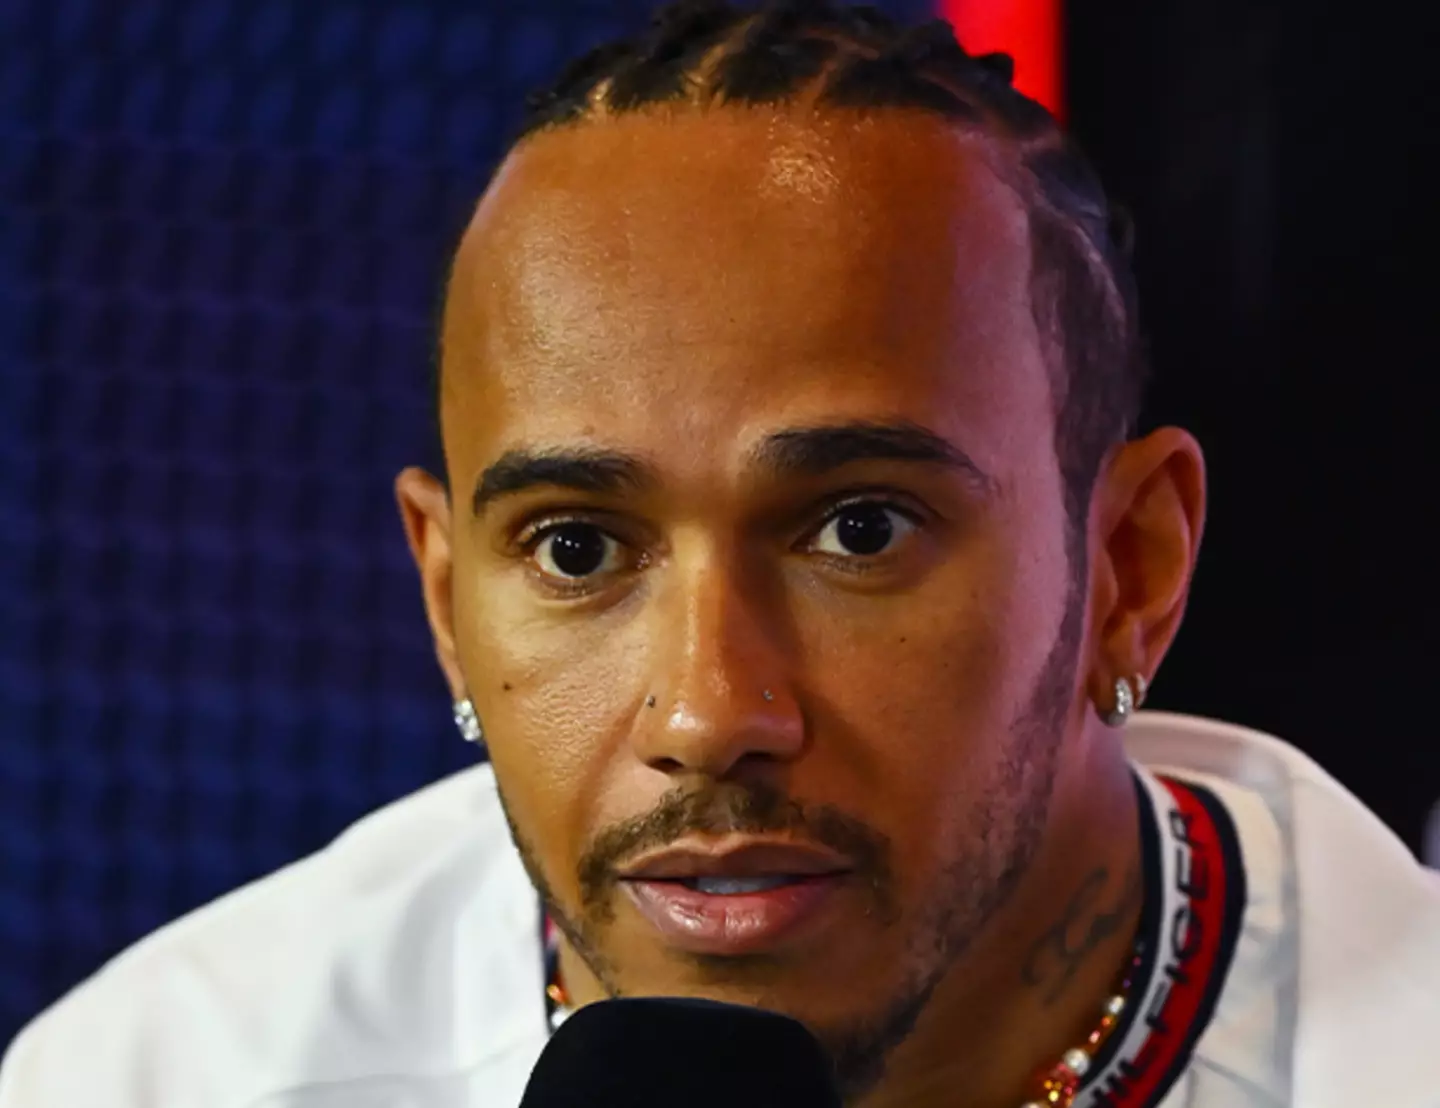 Lewis Hamilton is technically a seven-time world champion.